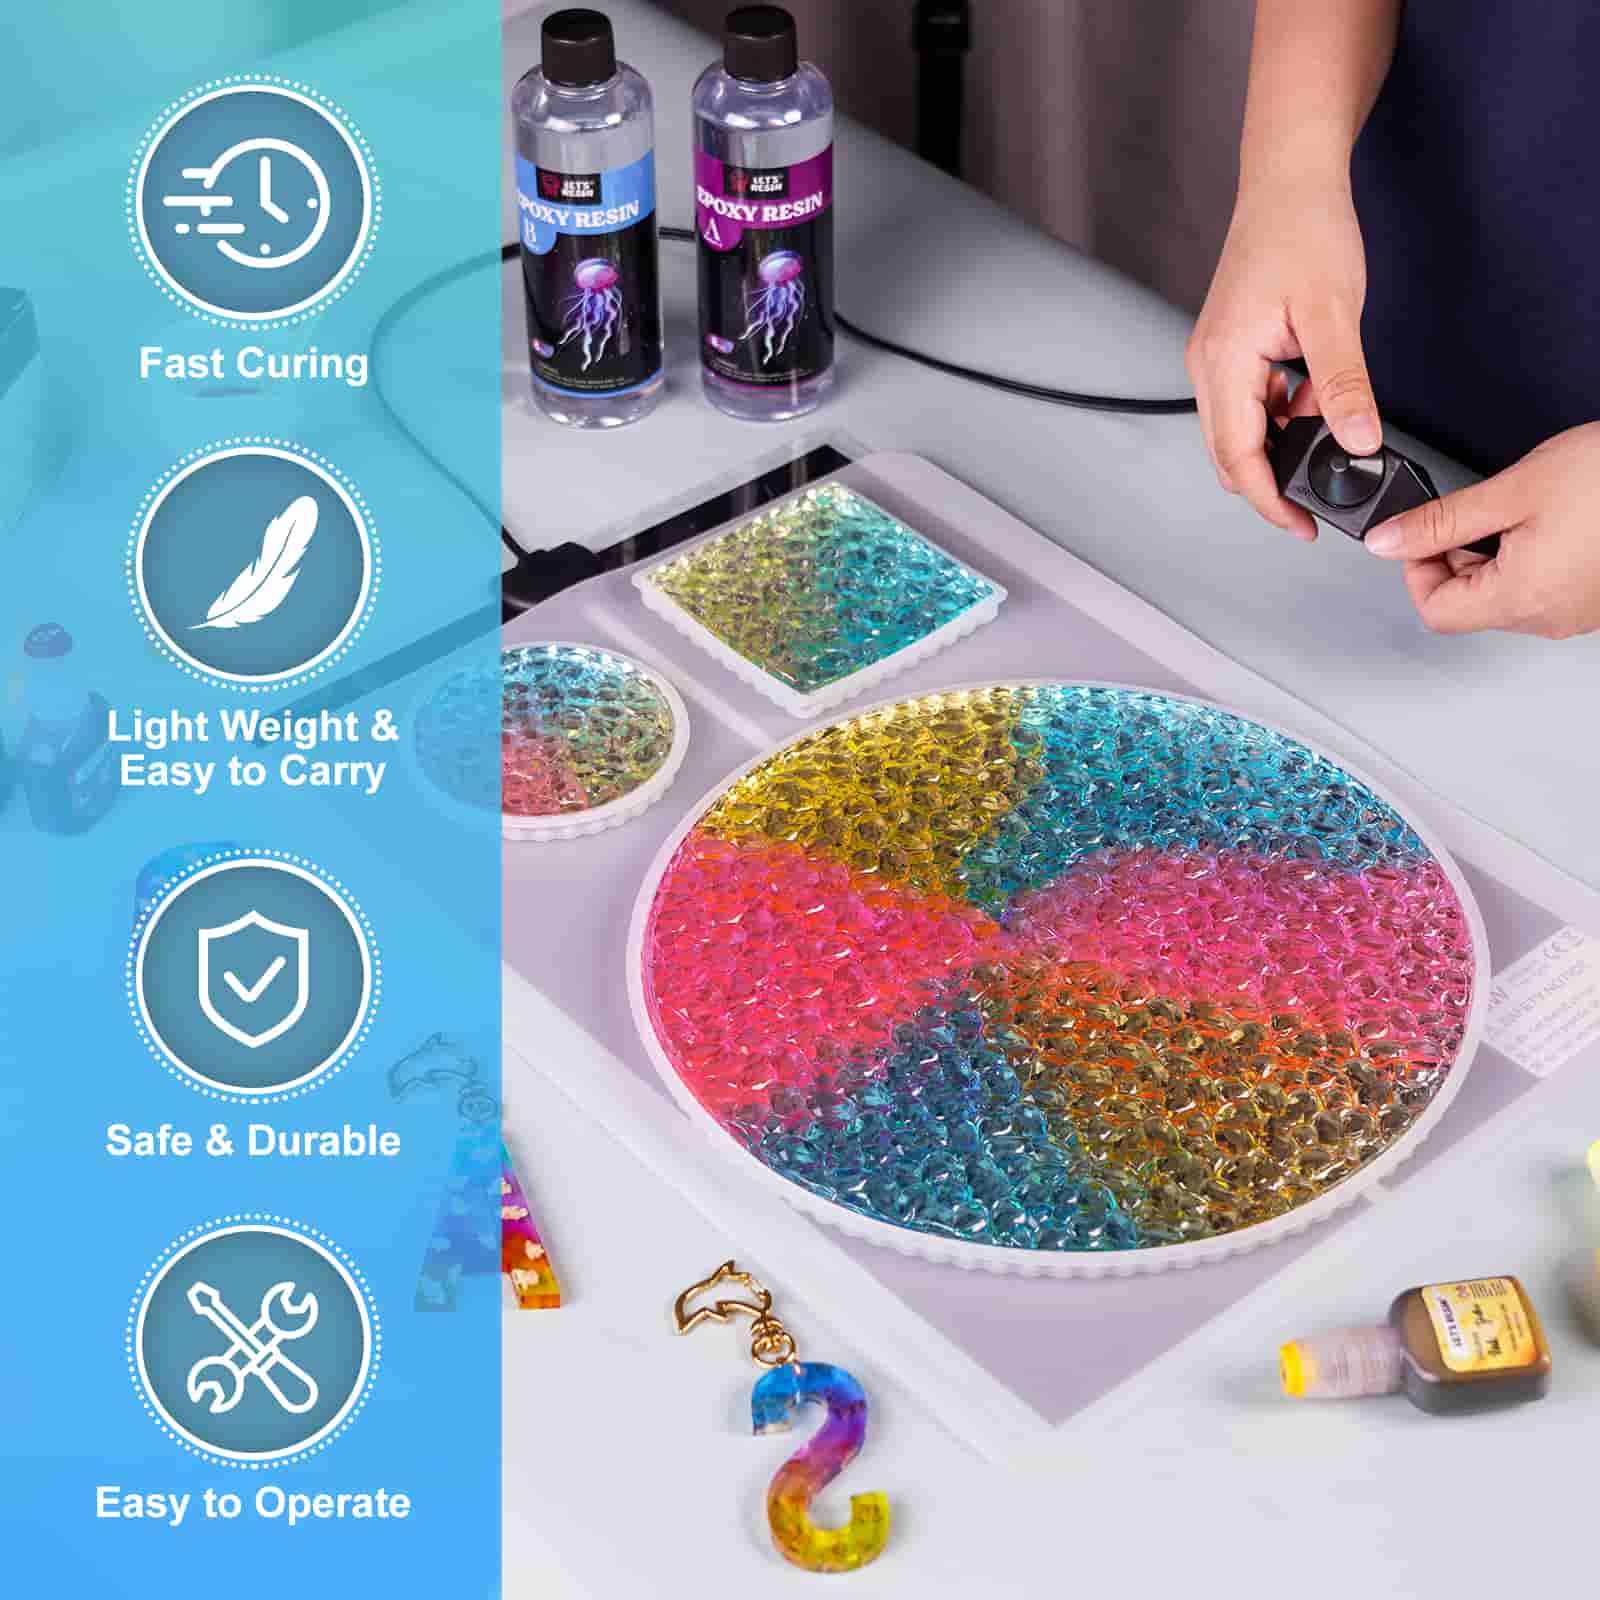 Resin Curing Machine Reviews: Top 6 Products For Quick And Flawless Resin  Art - Resin Art And Recommendations